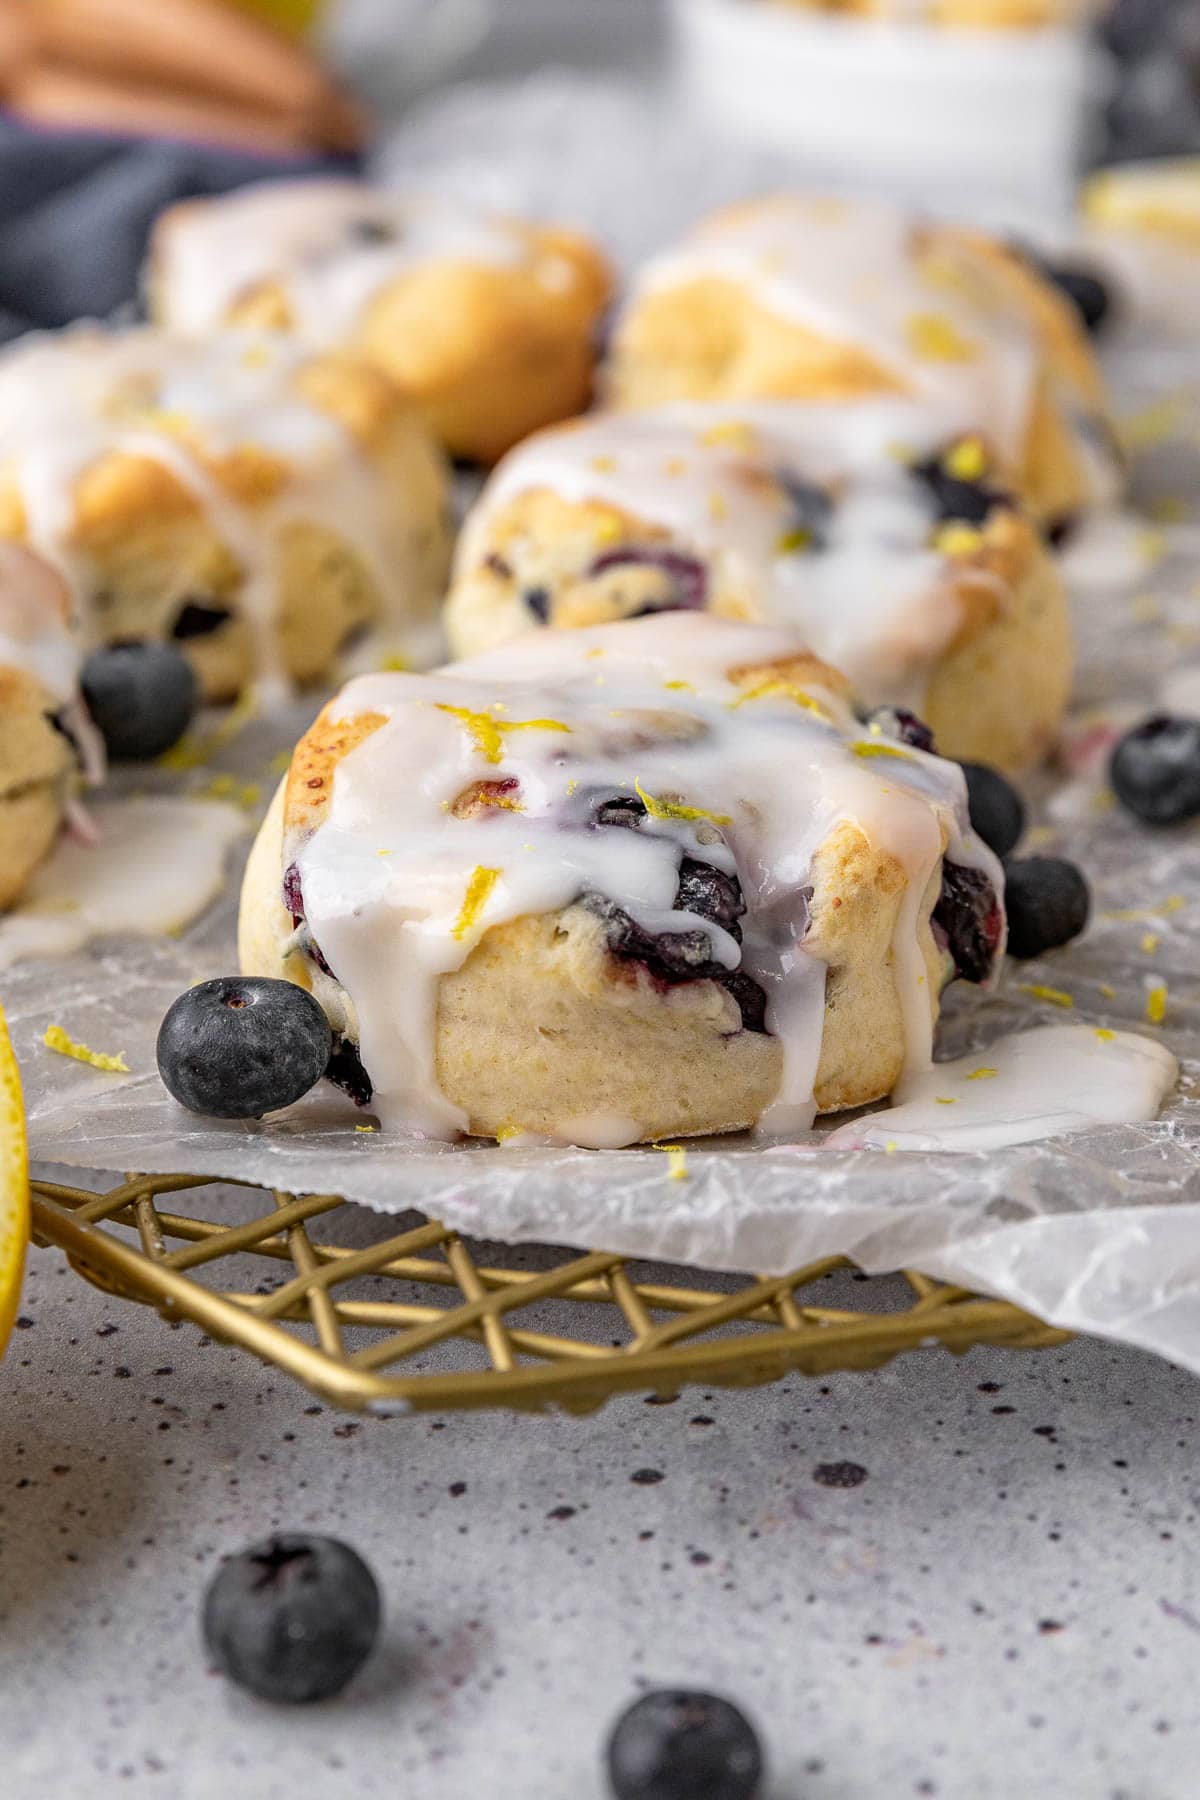 Lemon Blueberry Biscuits baked and glazed biscuits on parchment lined wire rack